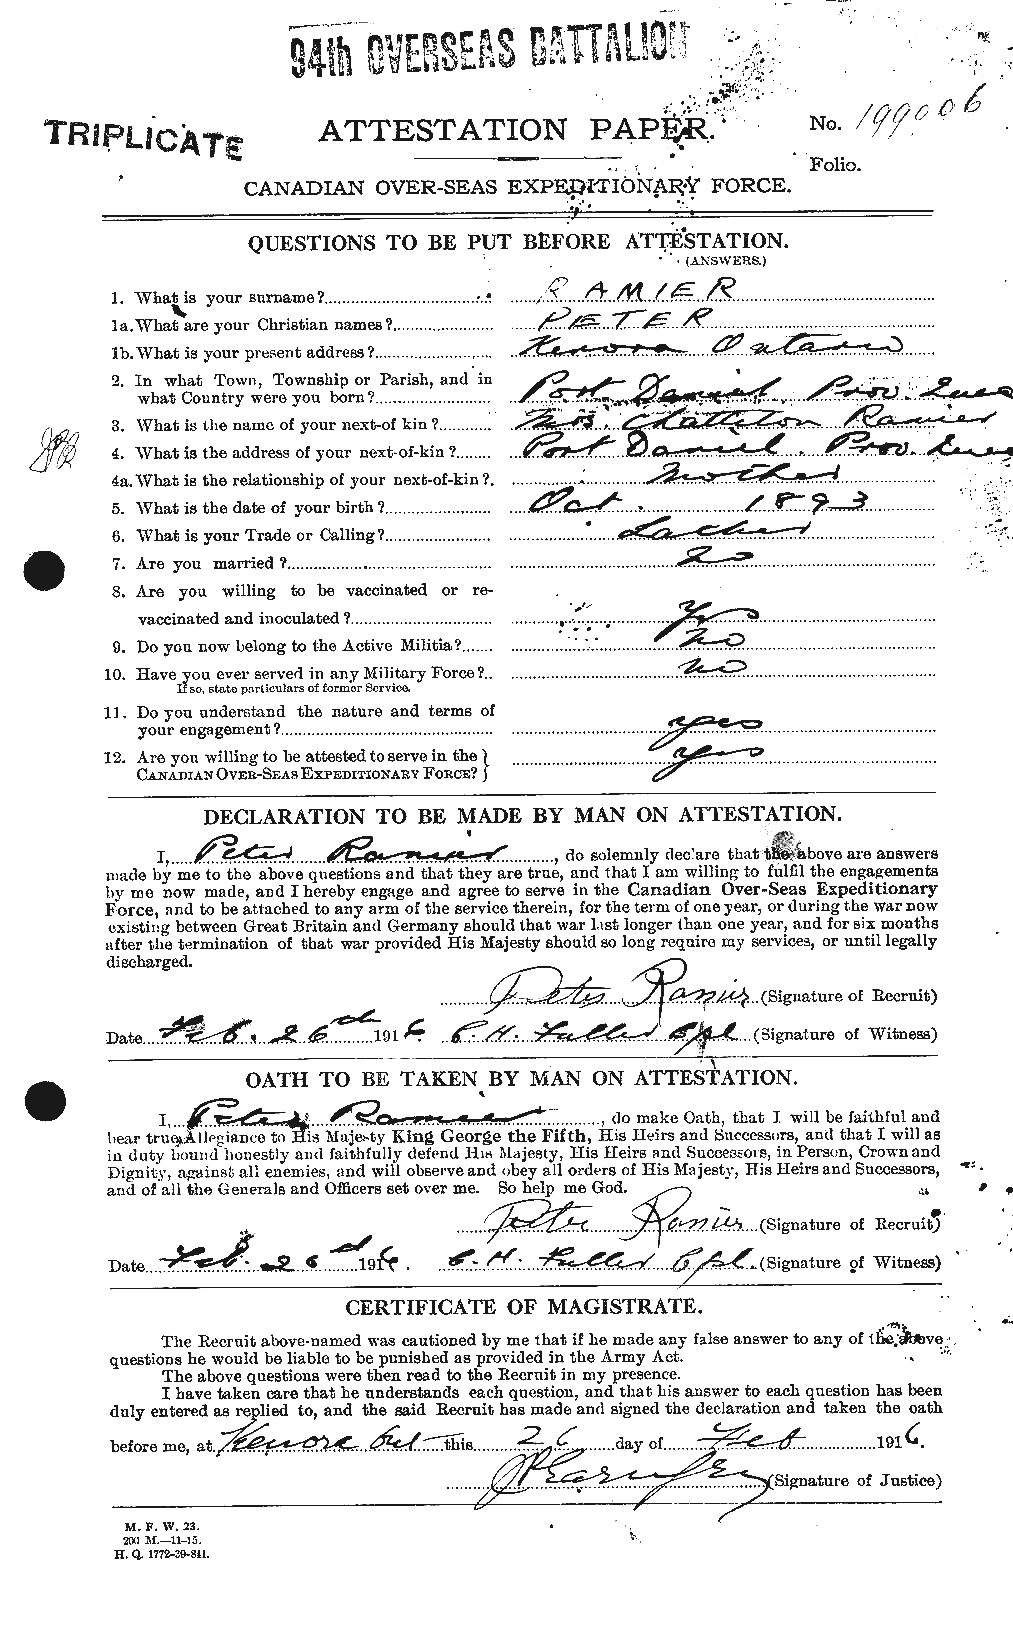 Personnel Records of the First World War - CEF 592382a